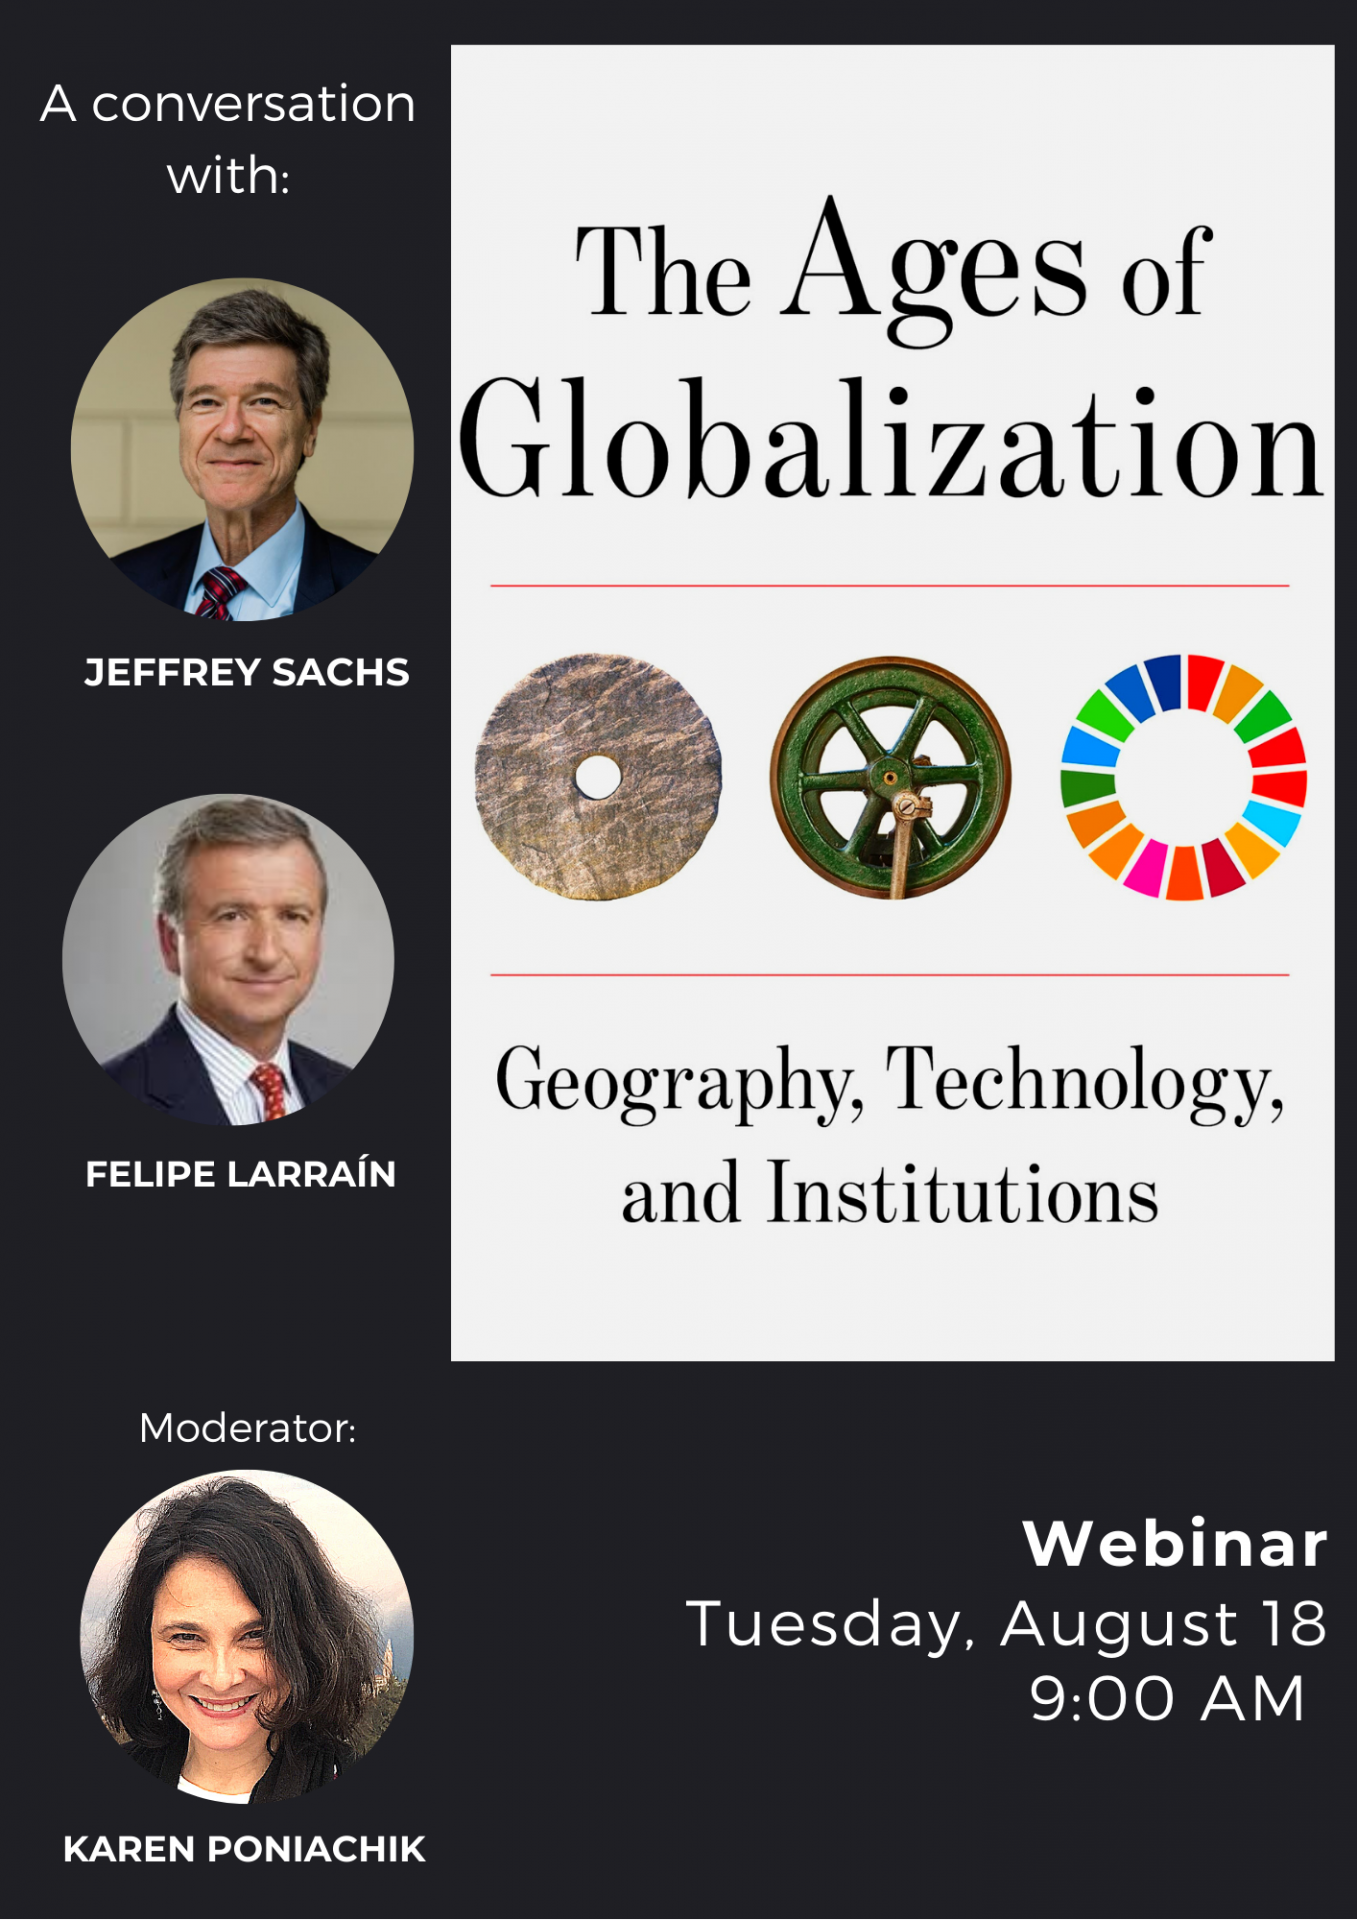 The Ages of Globalization: A Conversation with Jeffrey Sachs and Felipe Larraín